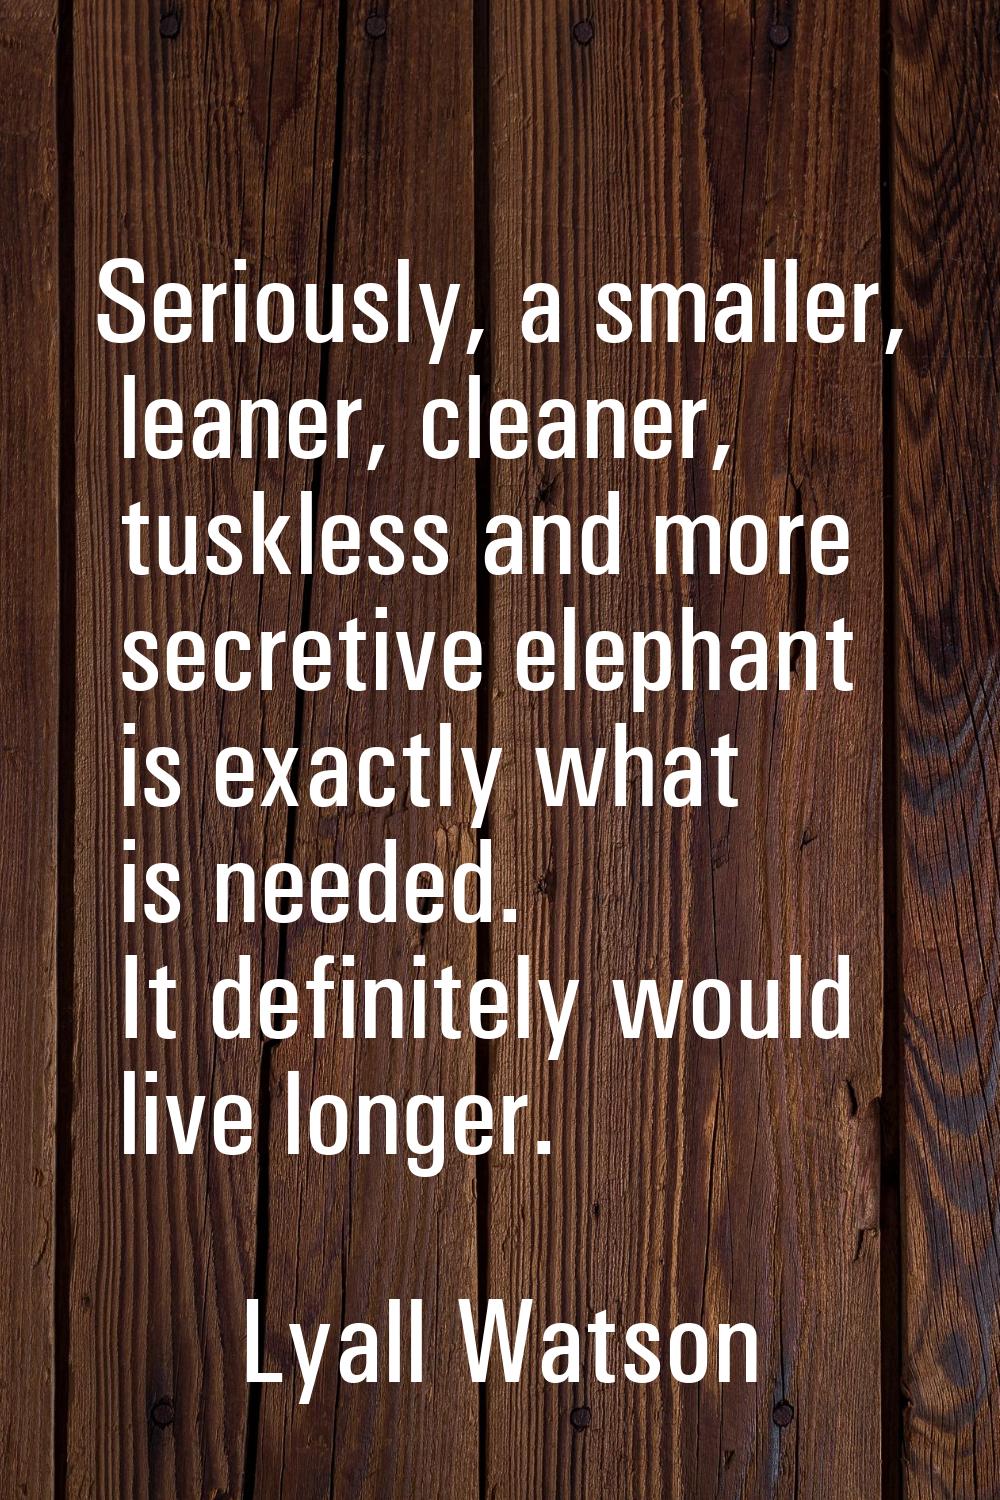 Seriously, a smaller, leaner, cleaner, tuskless and more secretive elephant is exactly what is need